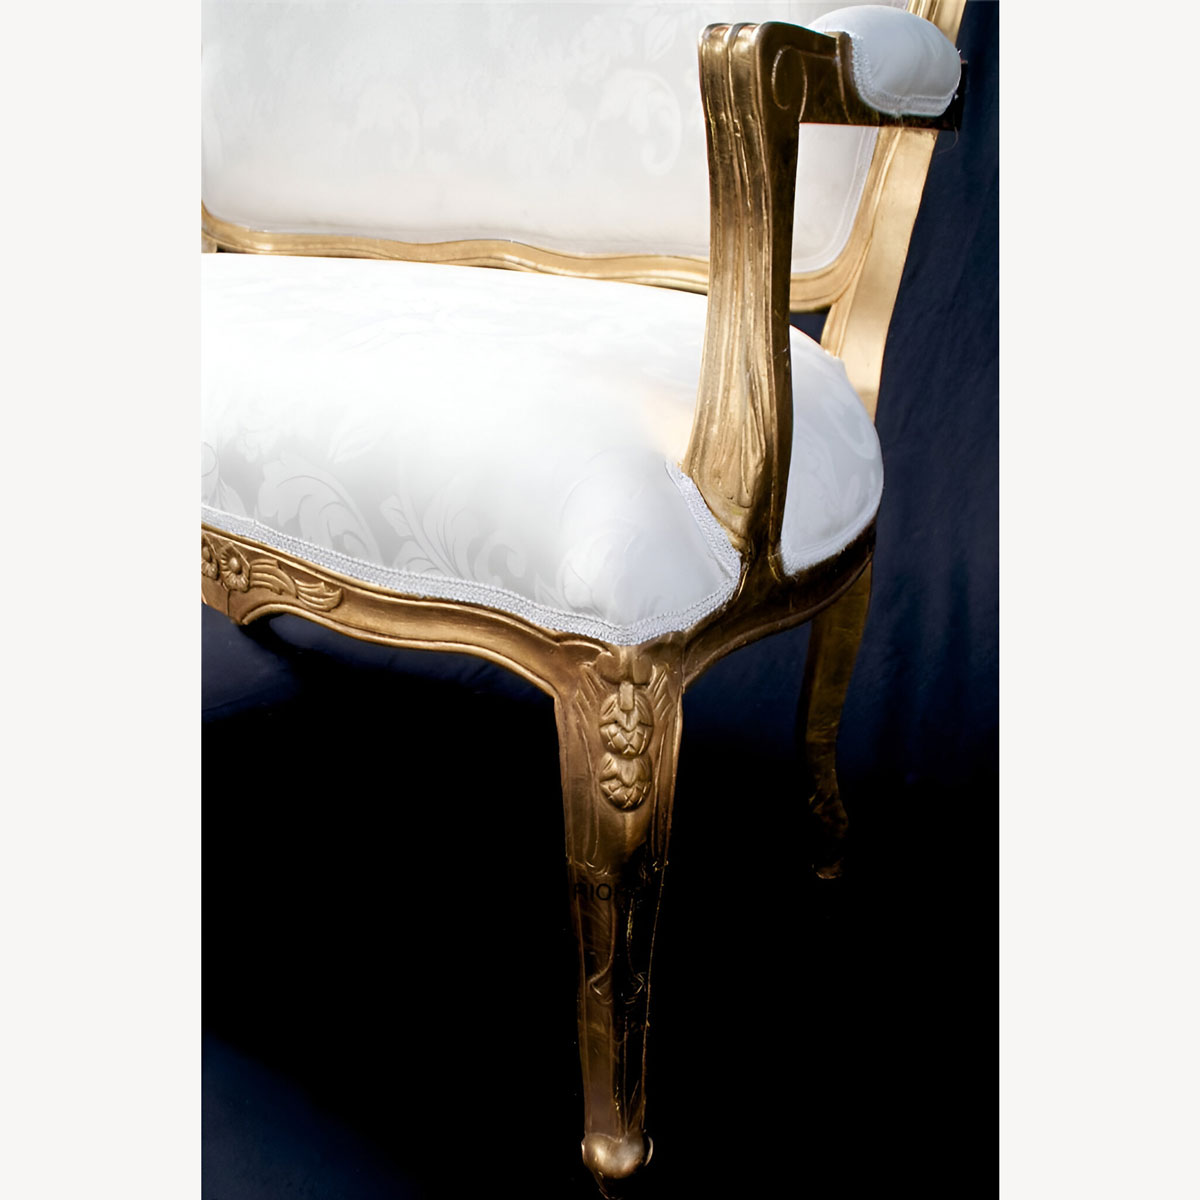 Josephine French Style Small Sofa Double Ended Chaise In Gold And Ivory Cream Damask 5 - Hampshire Barn Interiors - Josephine French Style Small Sofa / Double Ended Chaise In Gold And Ivory Cream Damask -